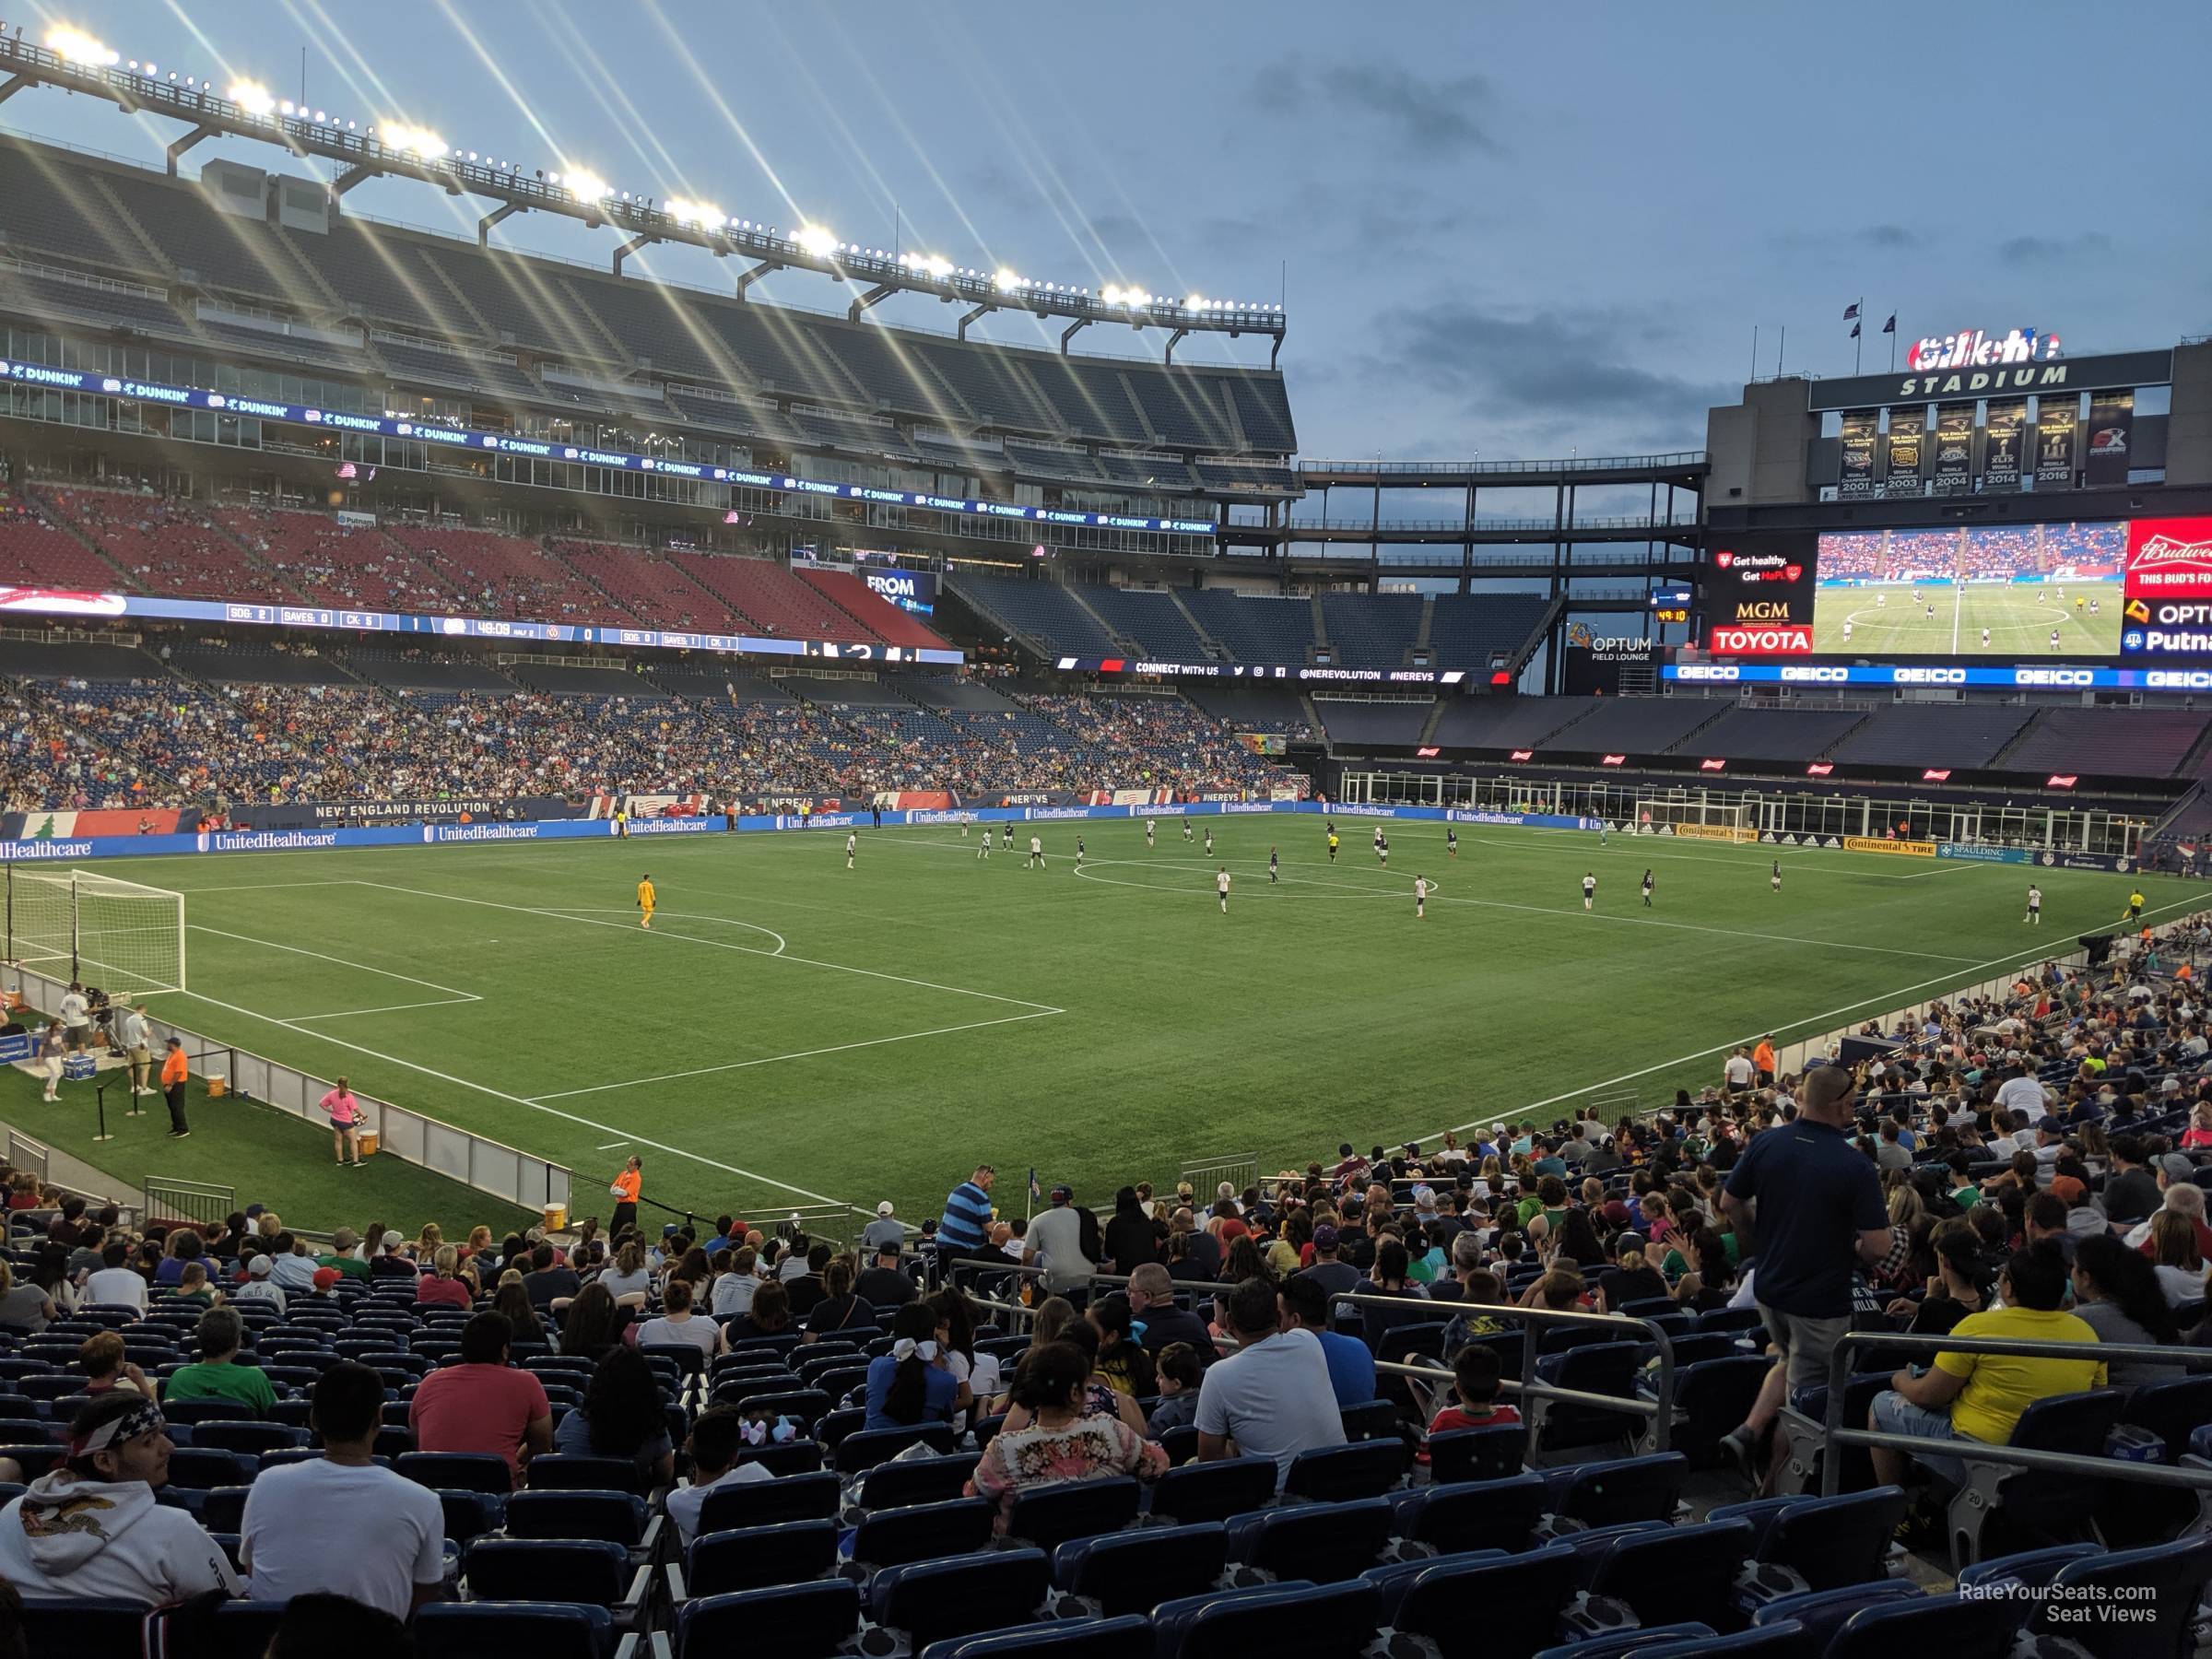 section 138, row 25 seat view  for soccer - gillette stadium